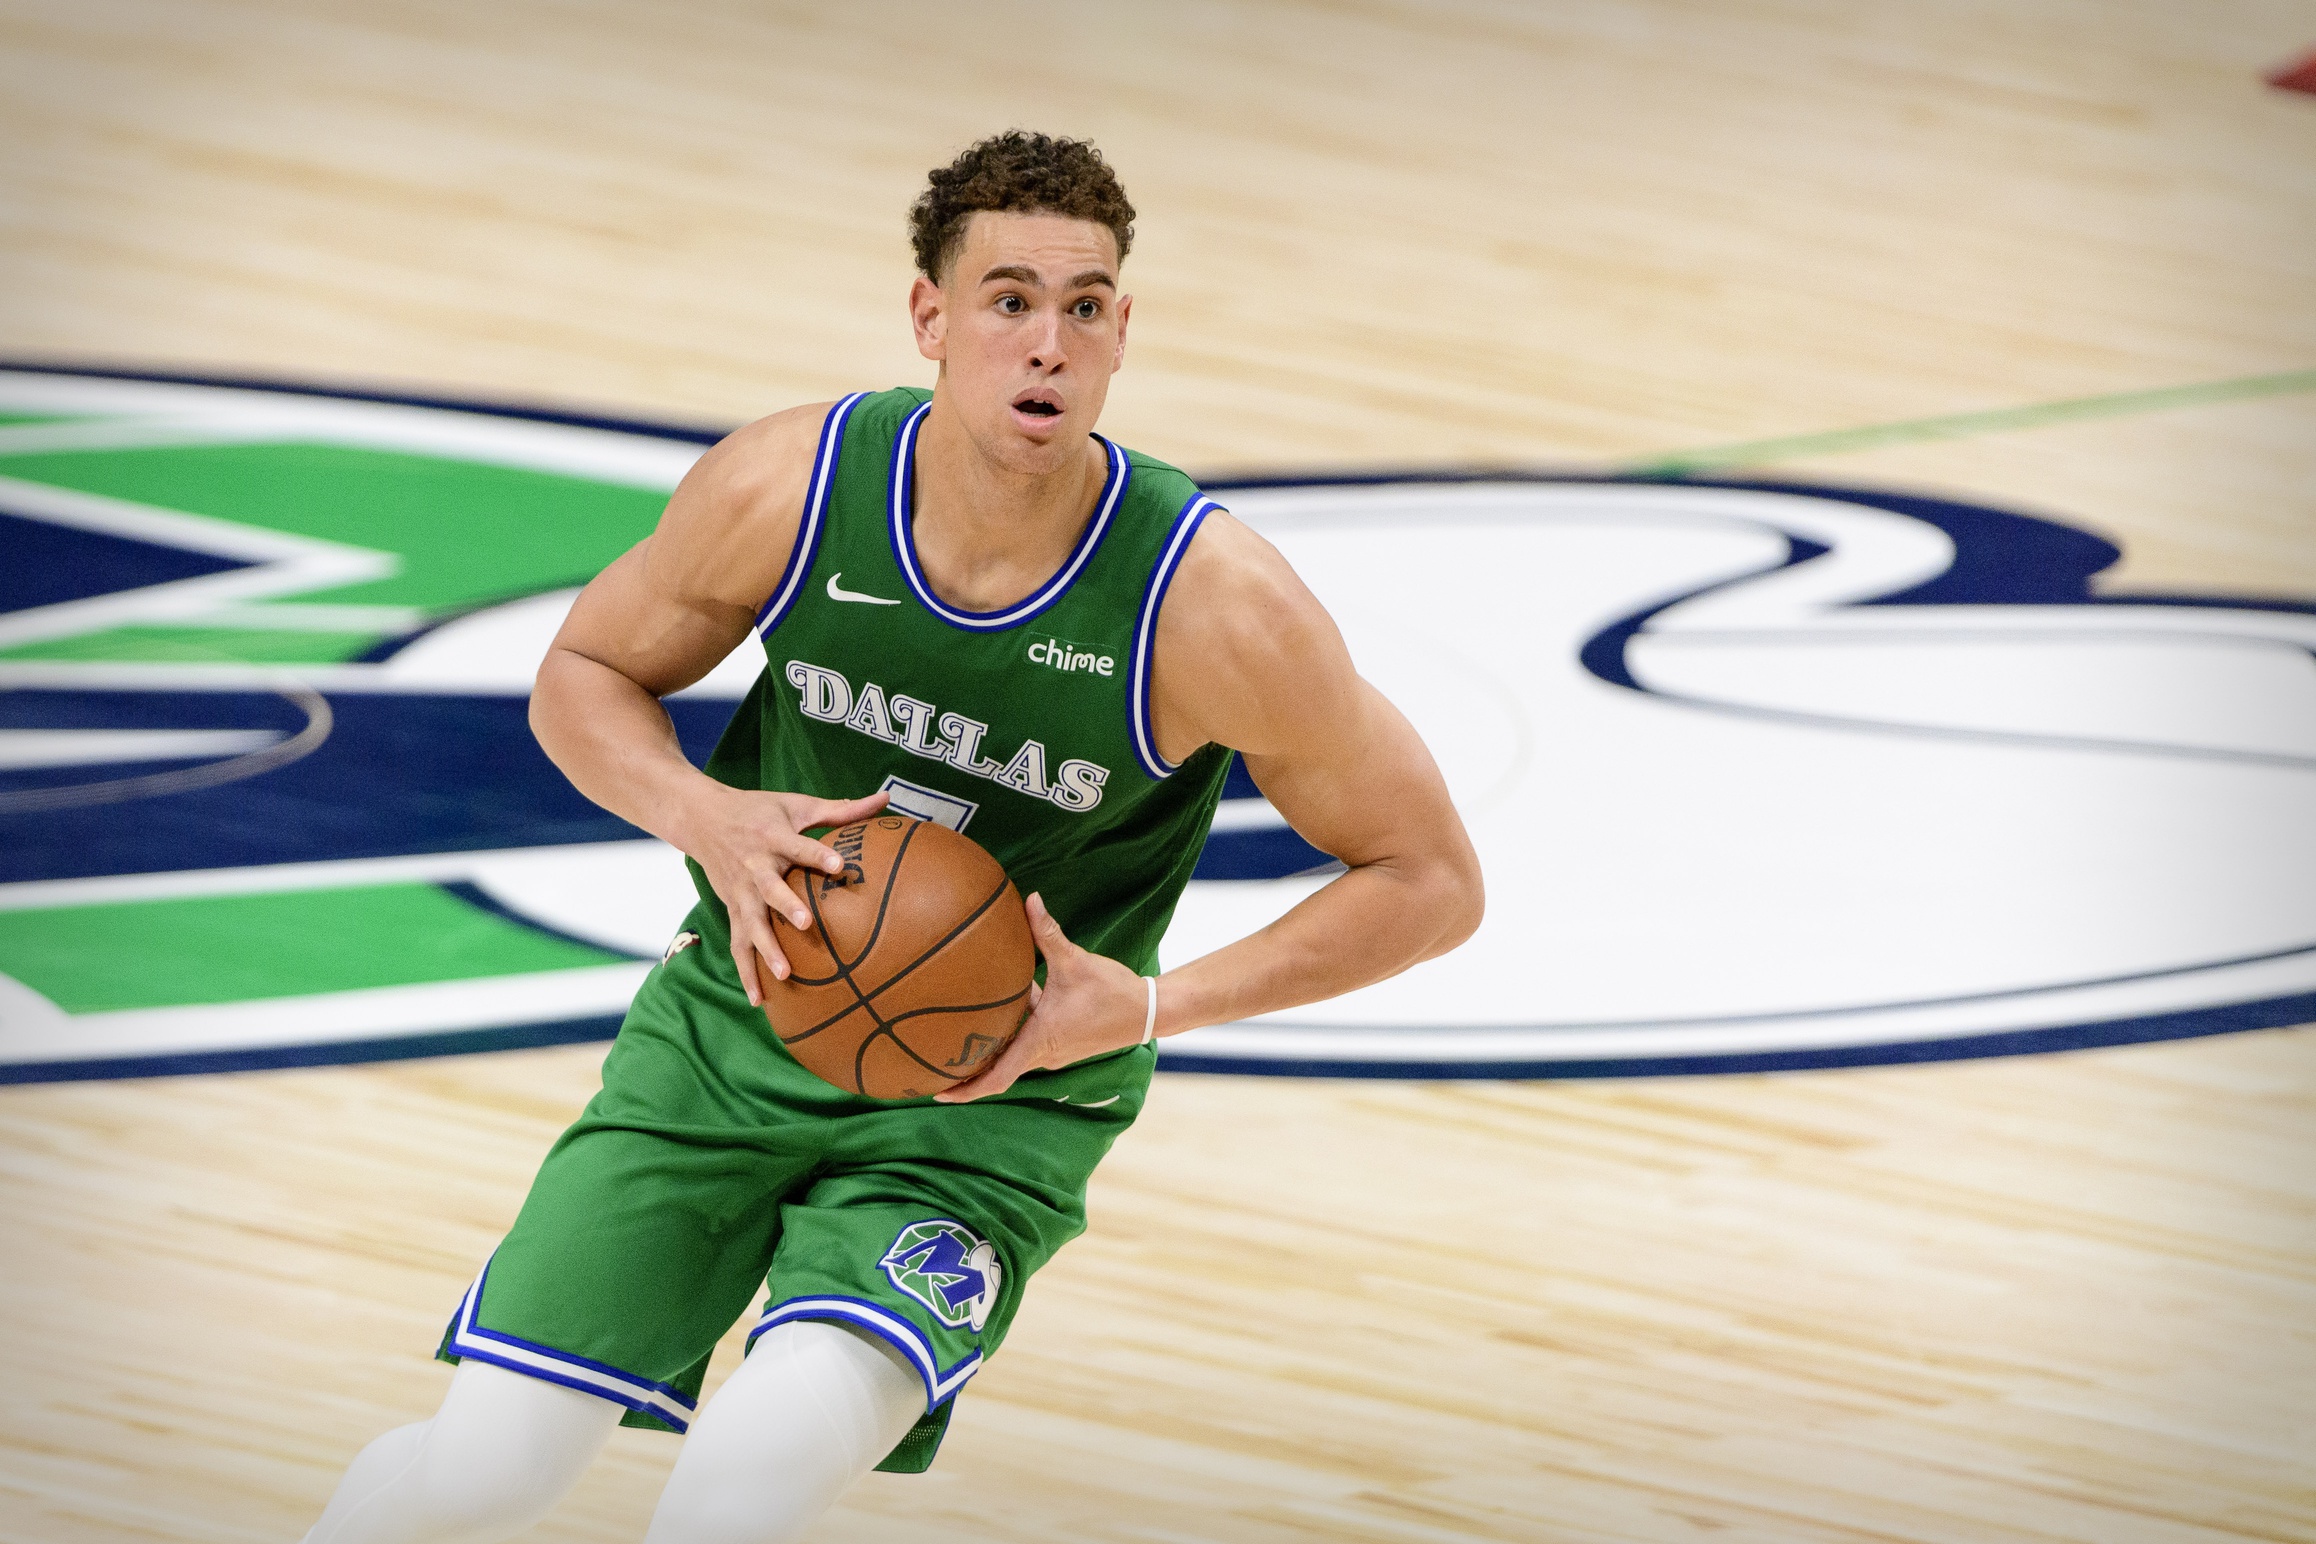 Dwight Powell has improved, but here's why he's not a starting center